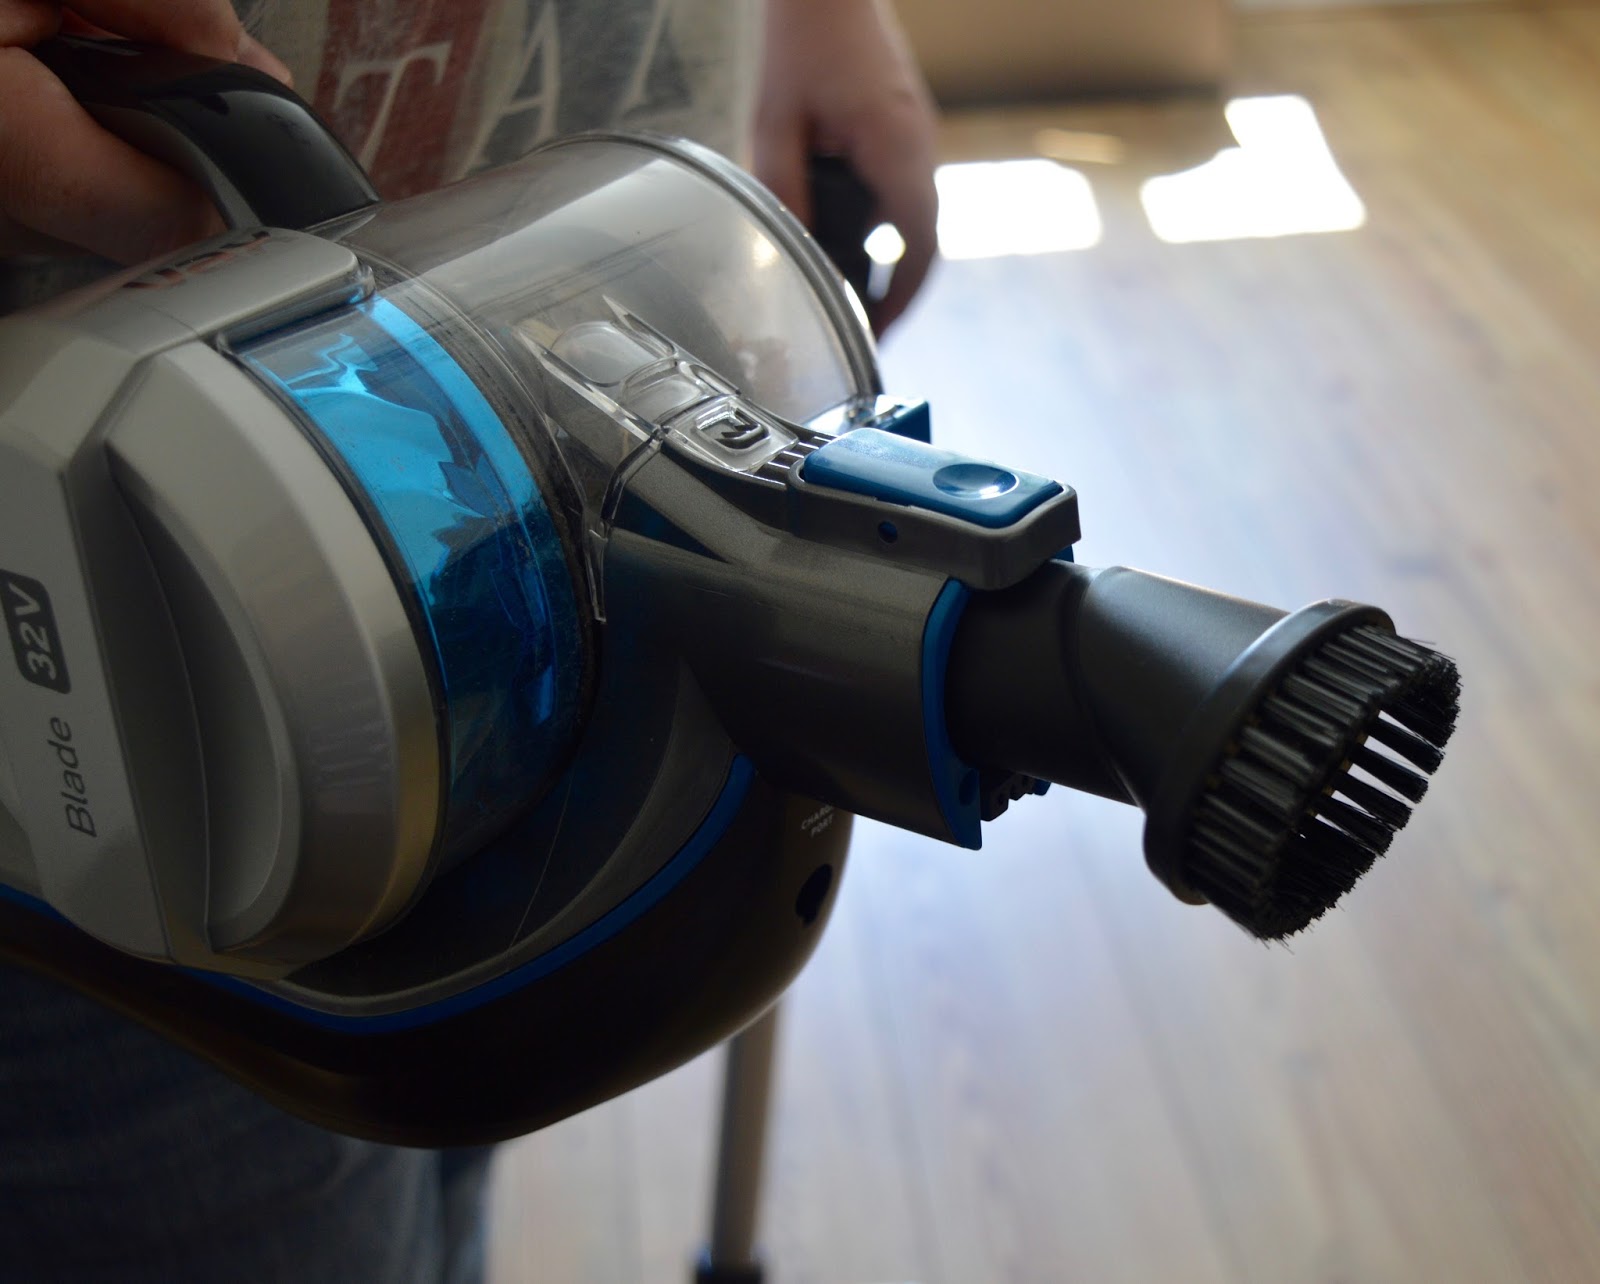 Are cordless vacuum cleaners powerful enough for every day use? | Vax Blade 32v Pro Cordless Stick Vacuum Cleaner Review